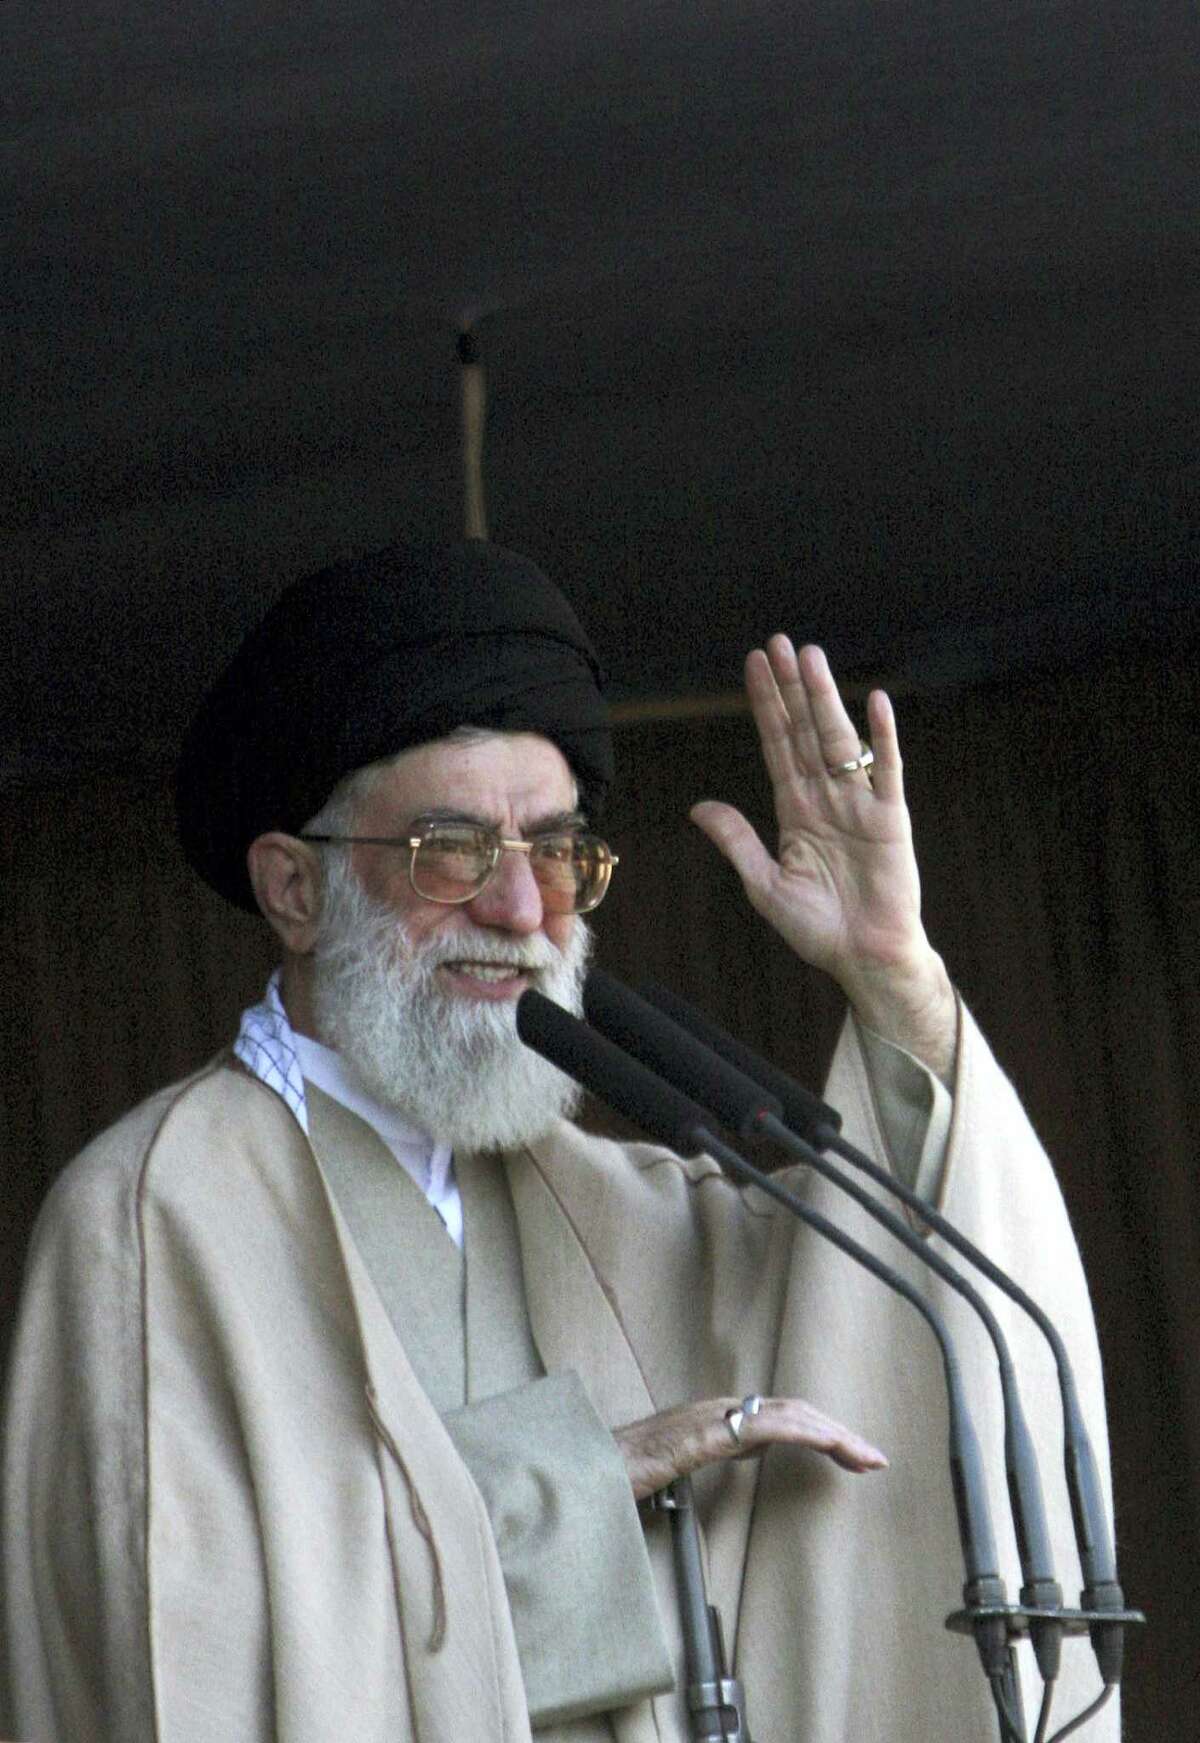 In this Friday Nov. 4, 2005, file photo. Iran’s supreme leader Ayatollah Ali Khamenei, waves to people who attend in Eid al-Fitr prayer the holiday marking the end of the Muslim holy month of Ramadan in Tehran. In his first public remarks since international sanctions were lifted following a U.N. report that Iran had fully complied in scaling back its nuclear program, Khamenei said Tehran should “exercise care the other party implements its commitments.”